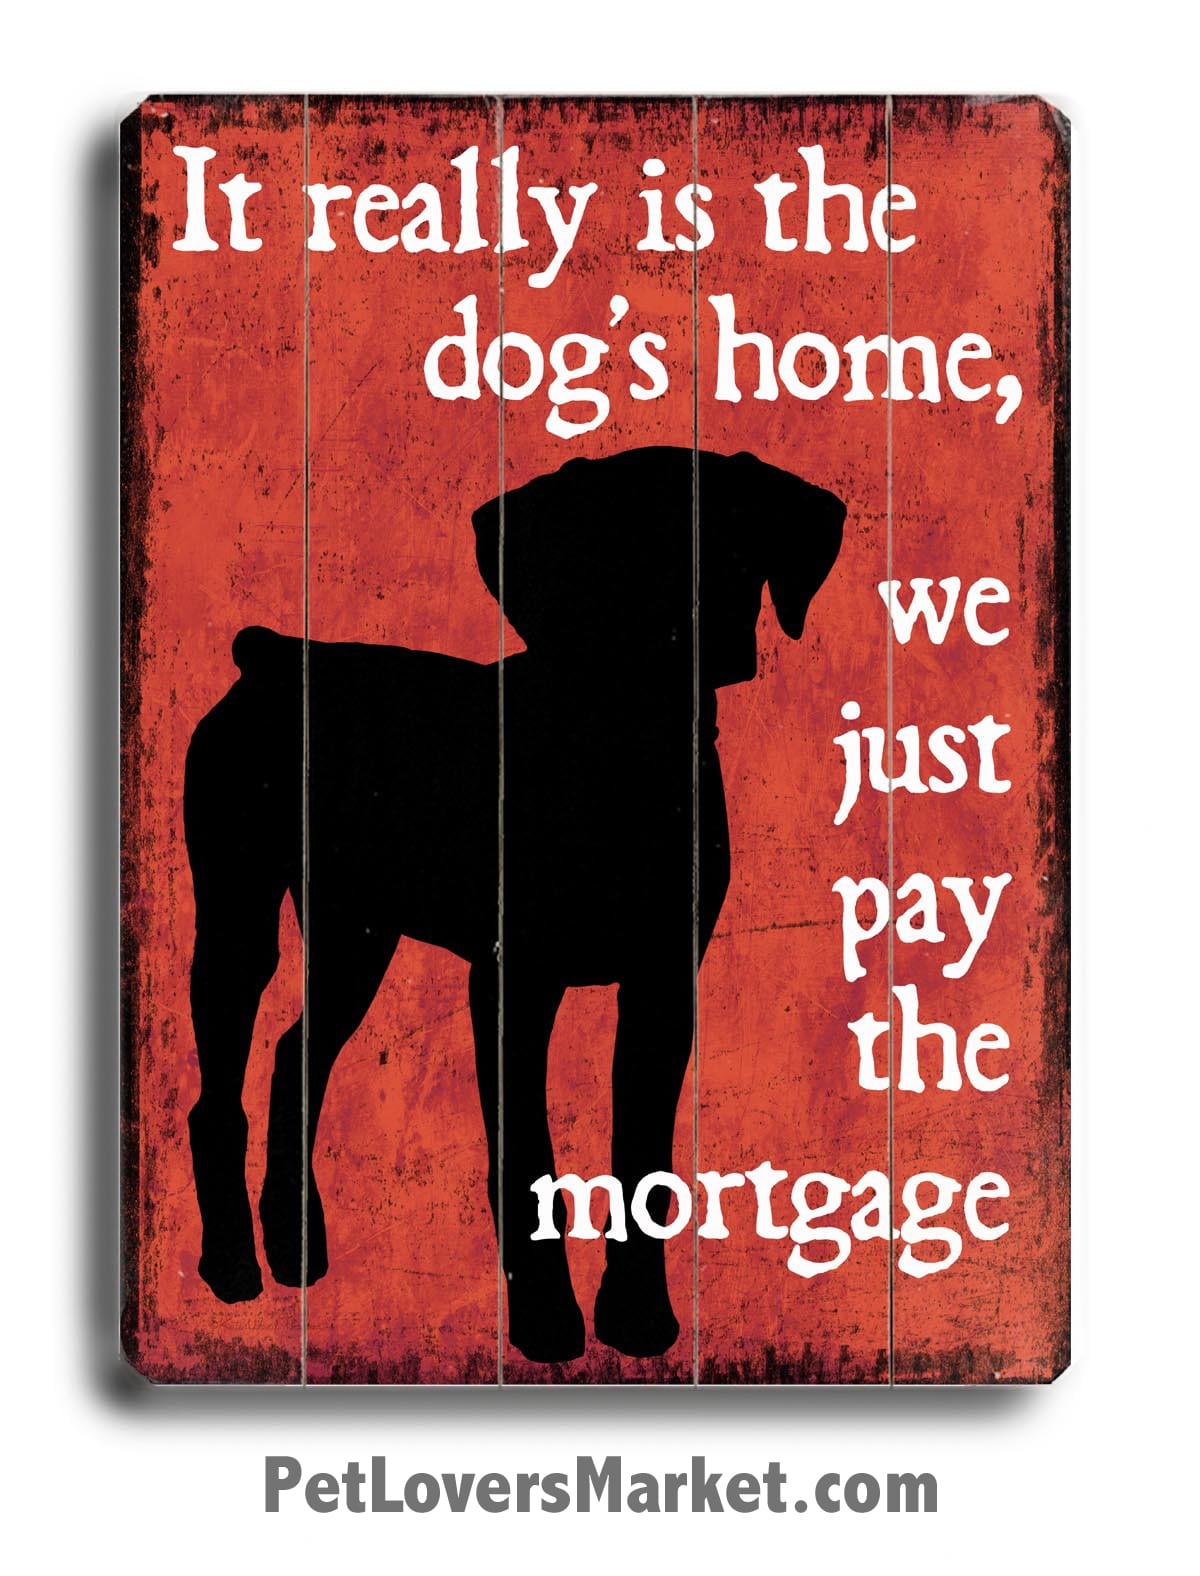 It really is the dog's home, we just pay the mortgage